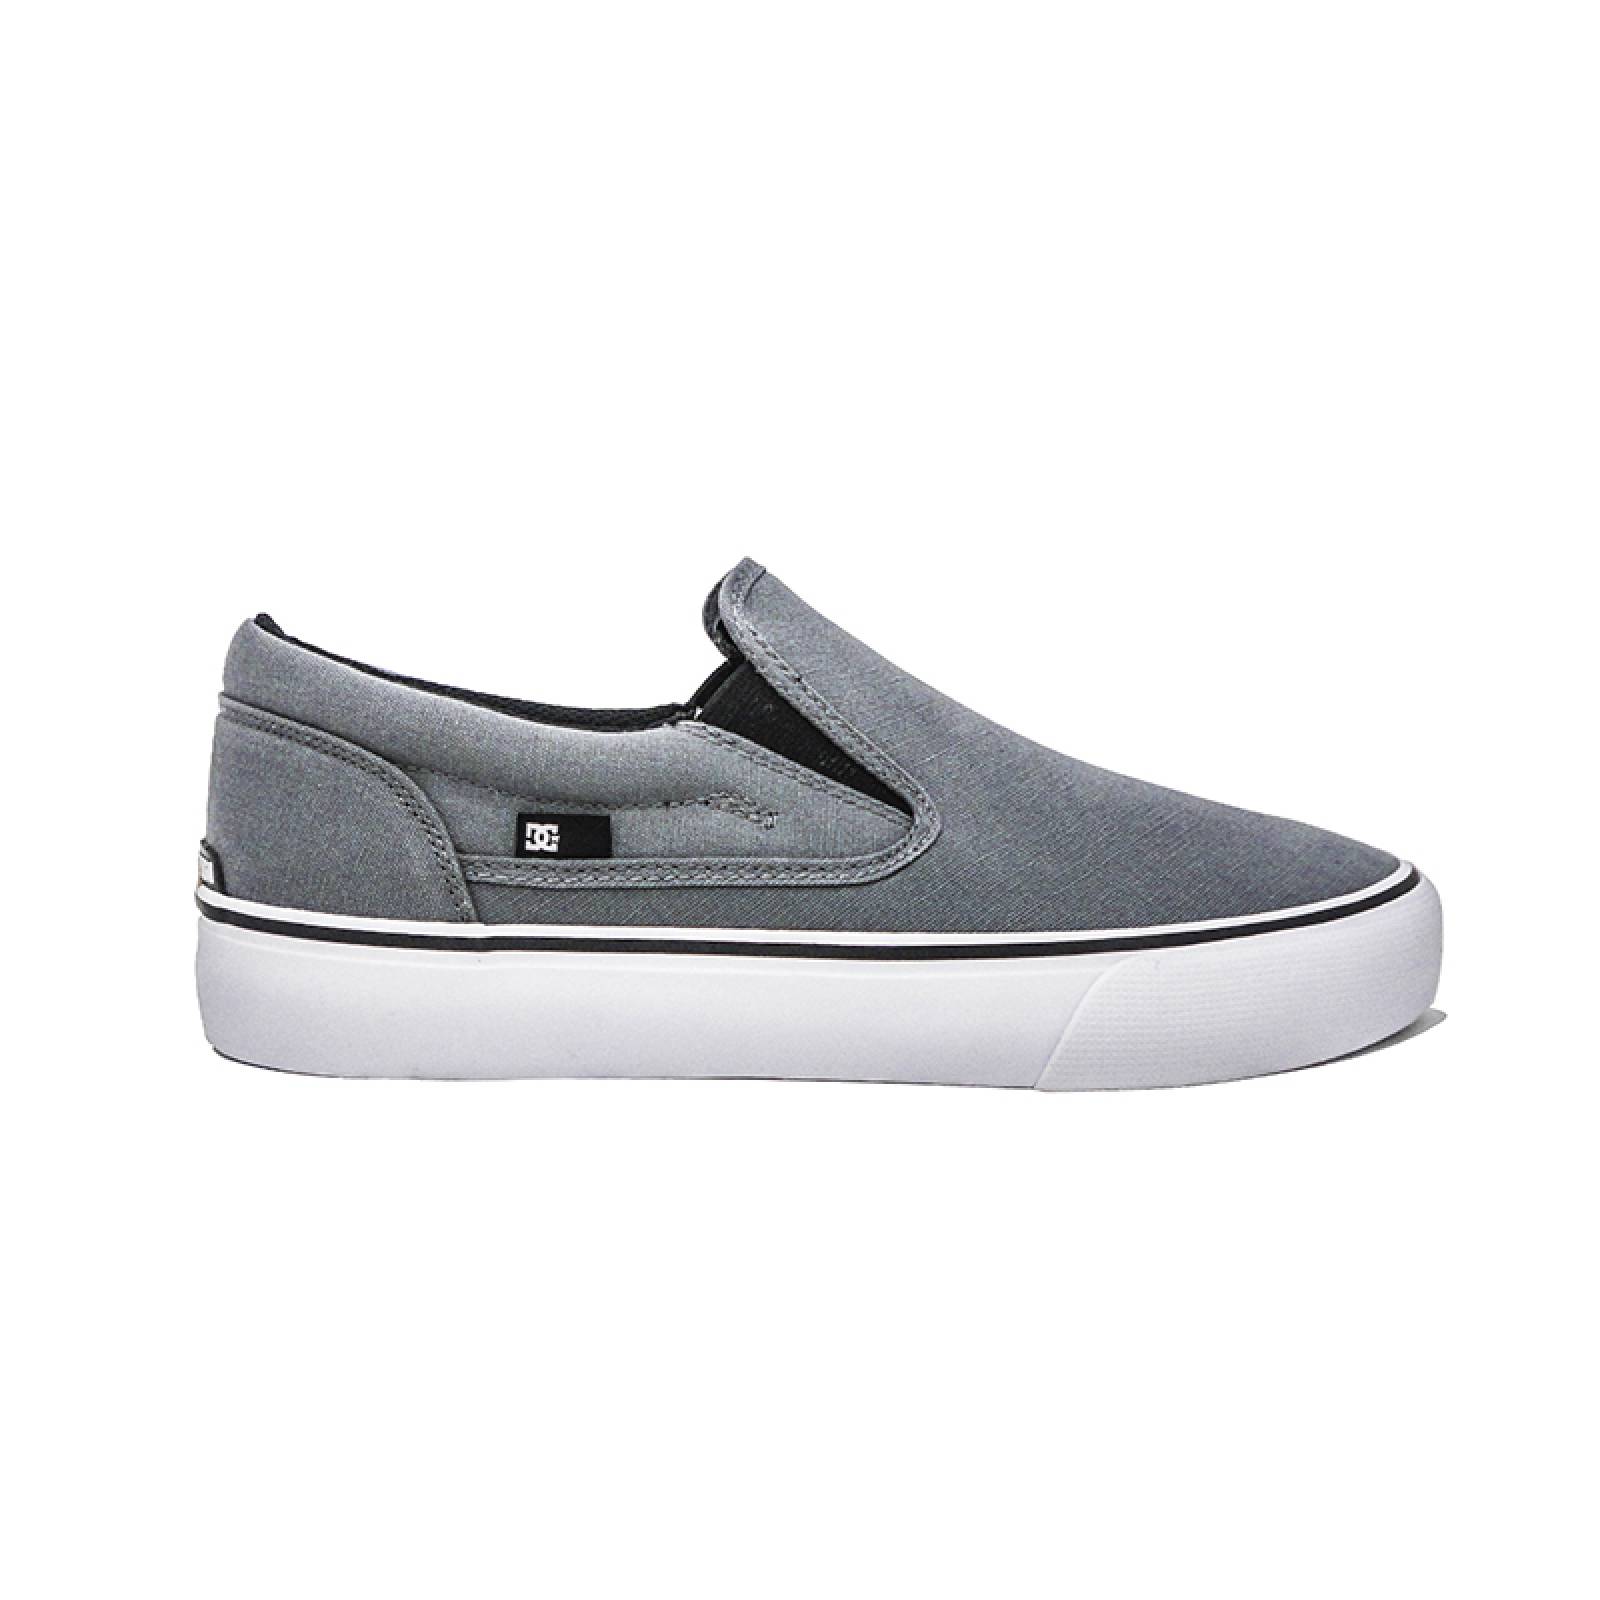 Tenis  Trase Slip On Tx Dc Shoes